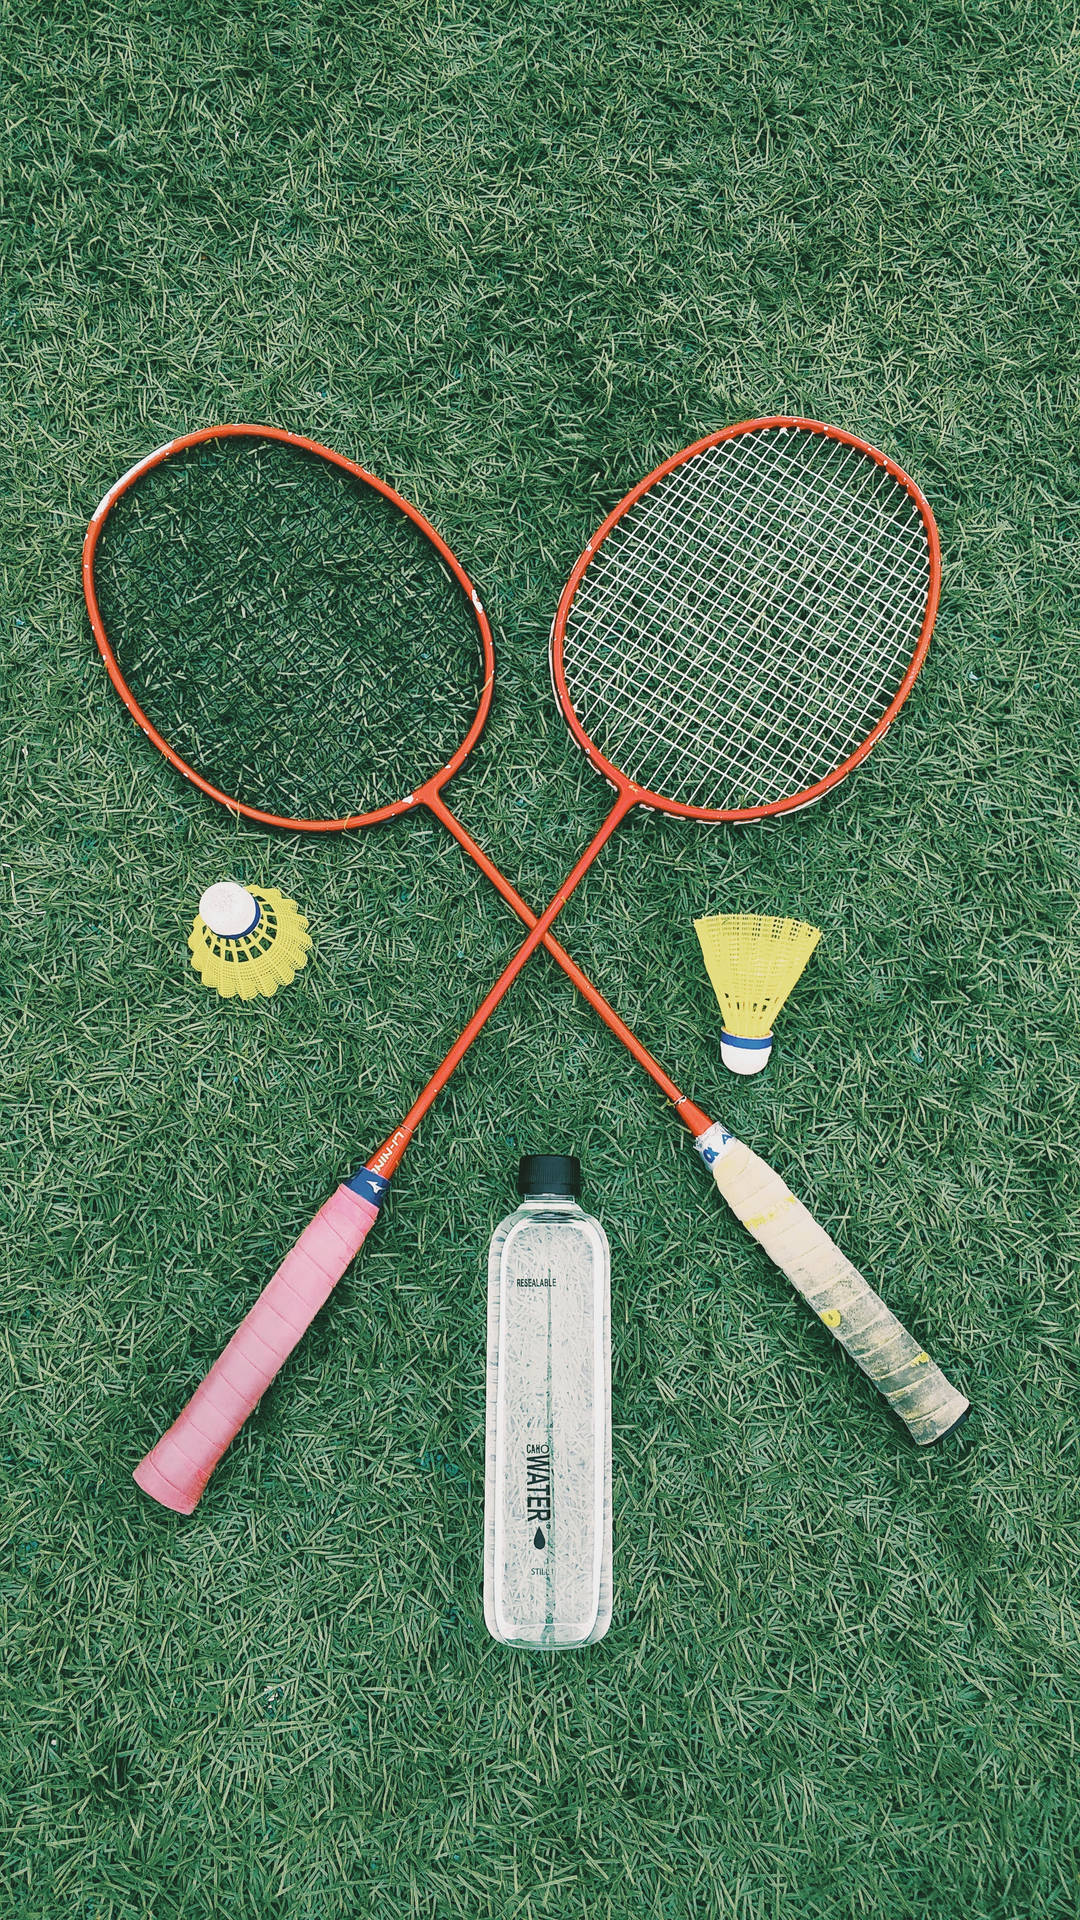 Badminton 2268X4032 Wallpaper and Background Image